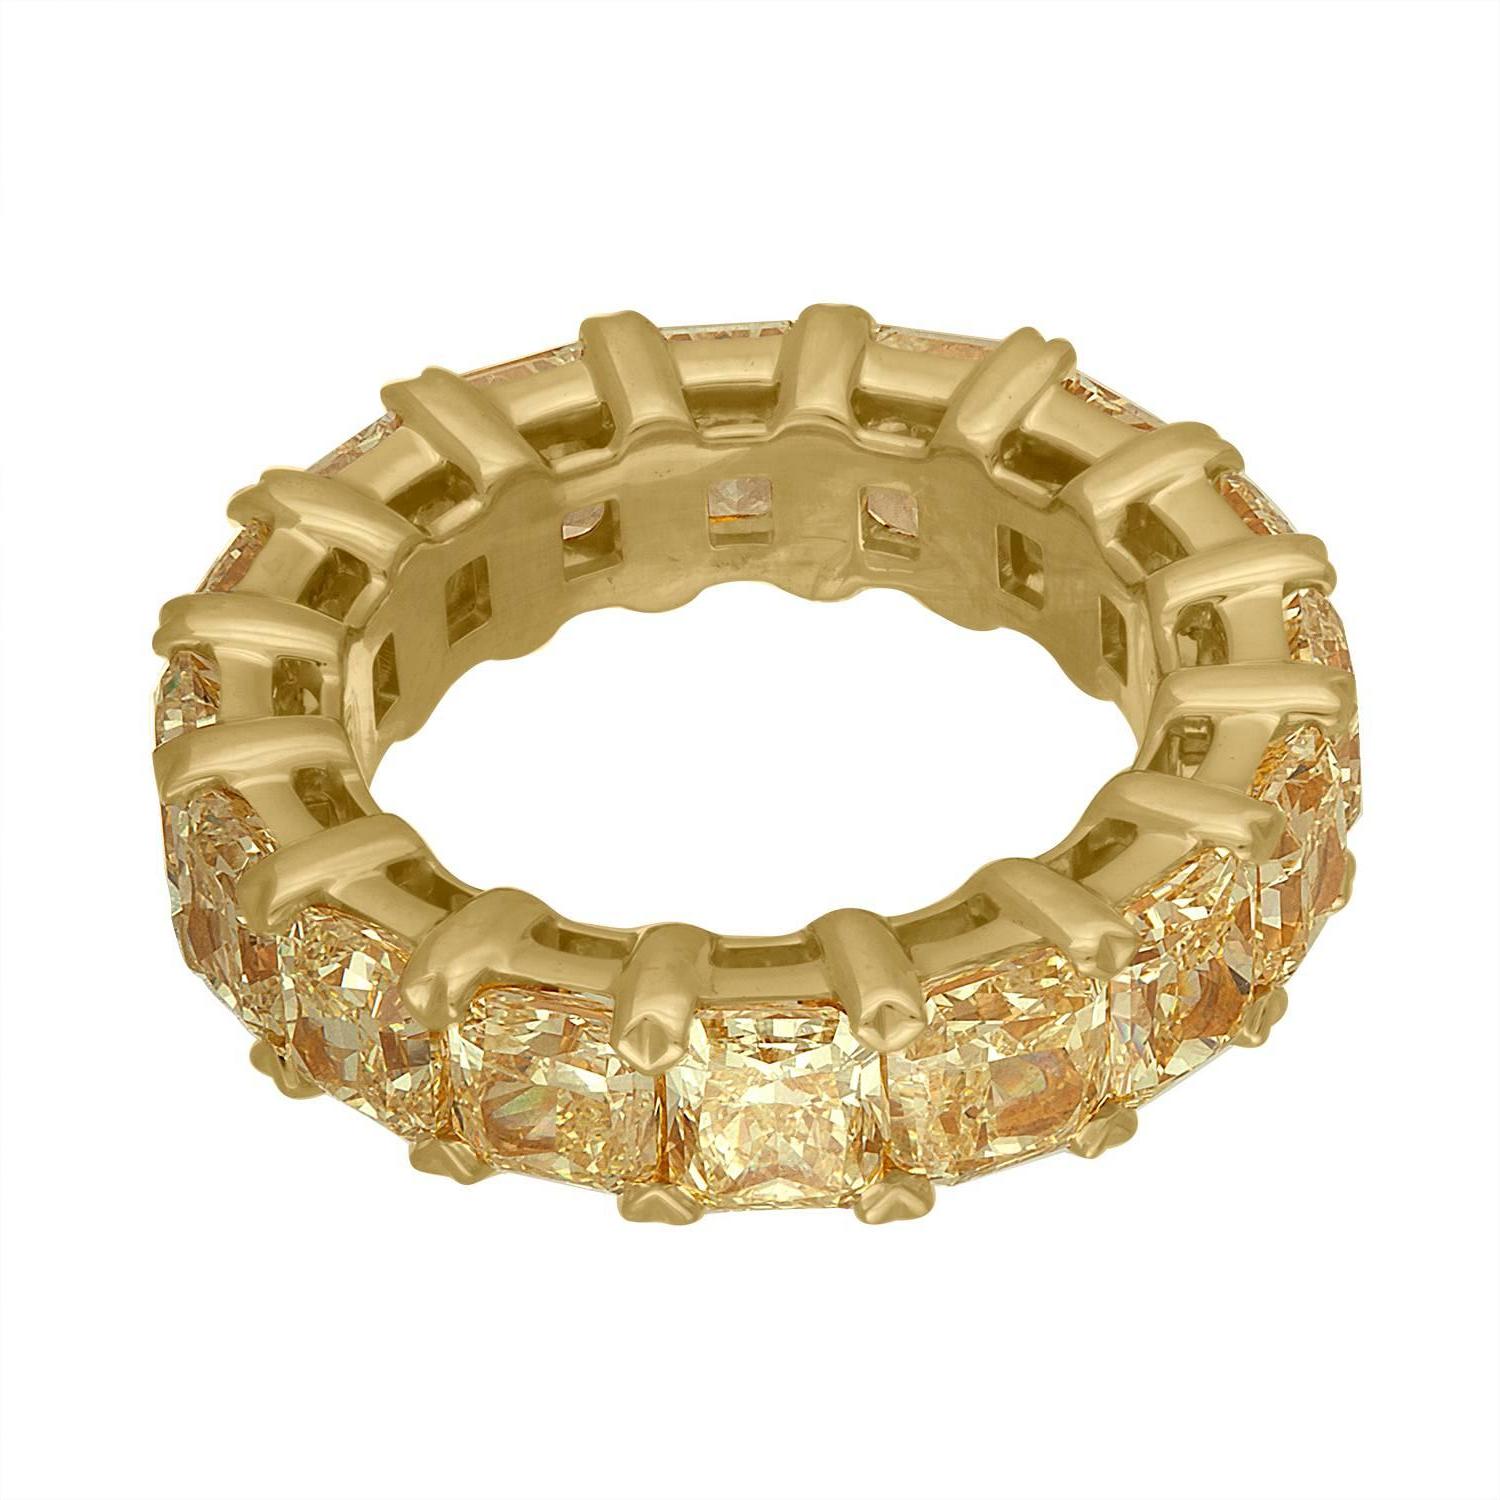 16 Matching Radiant Cut Yellow Diamonds are Set in 18 Karat Yellow Gold Eternity Band.
Each Diamond is Approximately 0.55 Carat. The Total Weight of the 16 Beautiful Diamonds are 8.90 Carats Total Weight.
It is Your Classic Wedding Band, Each